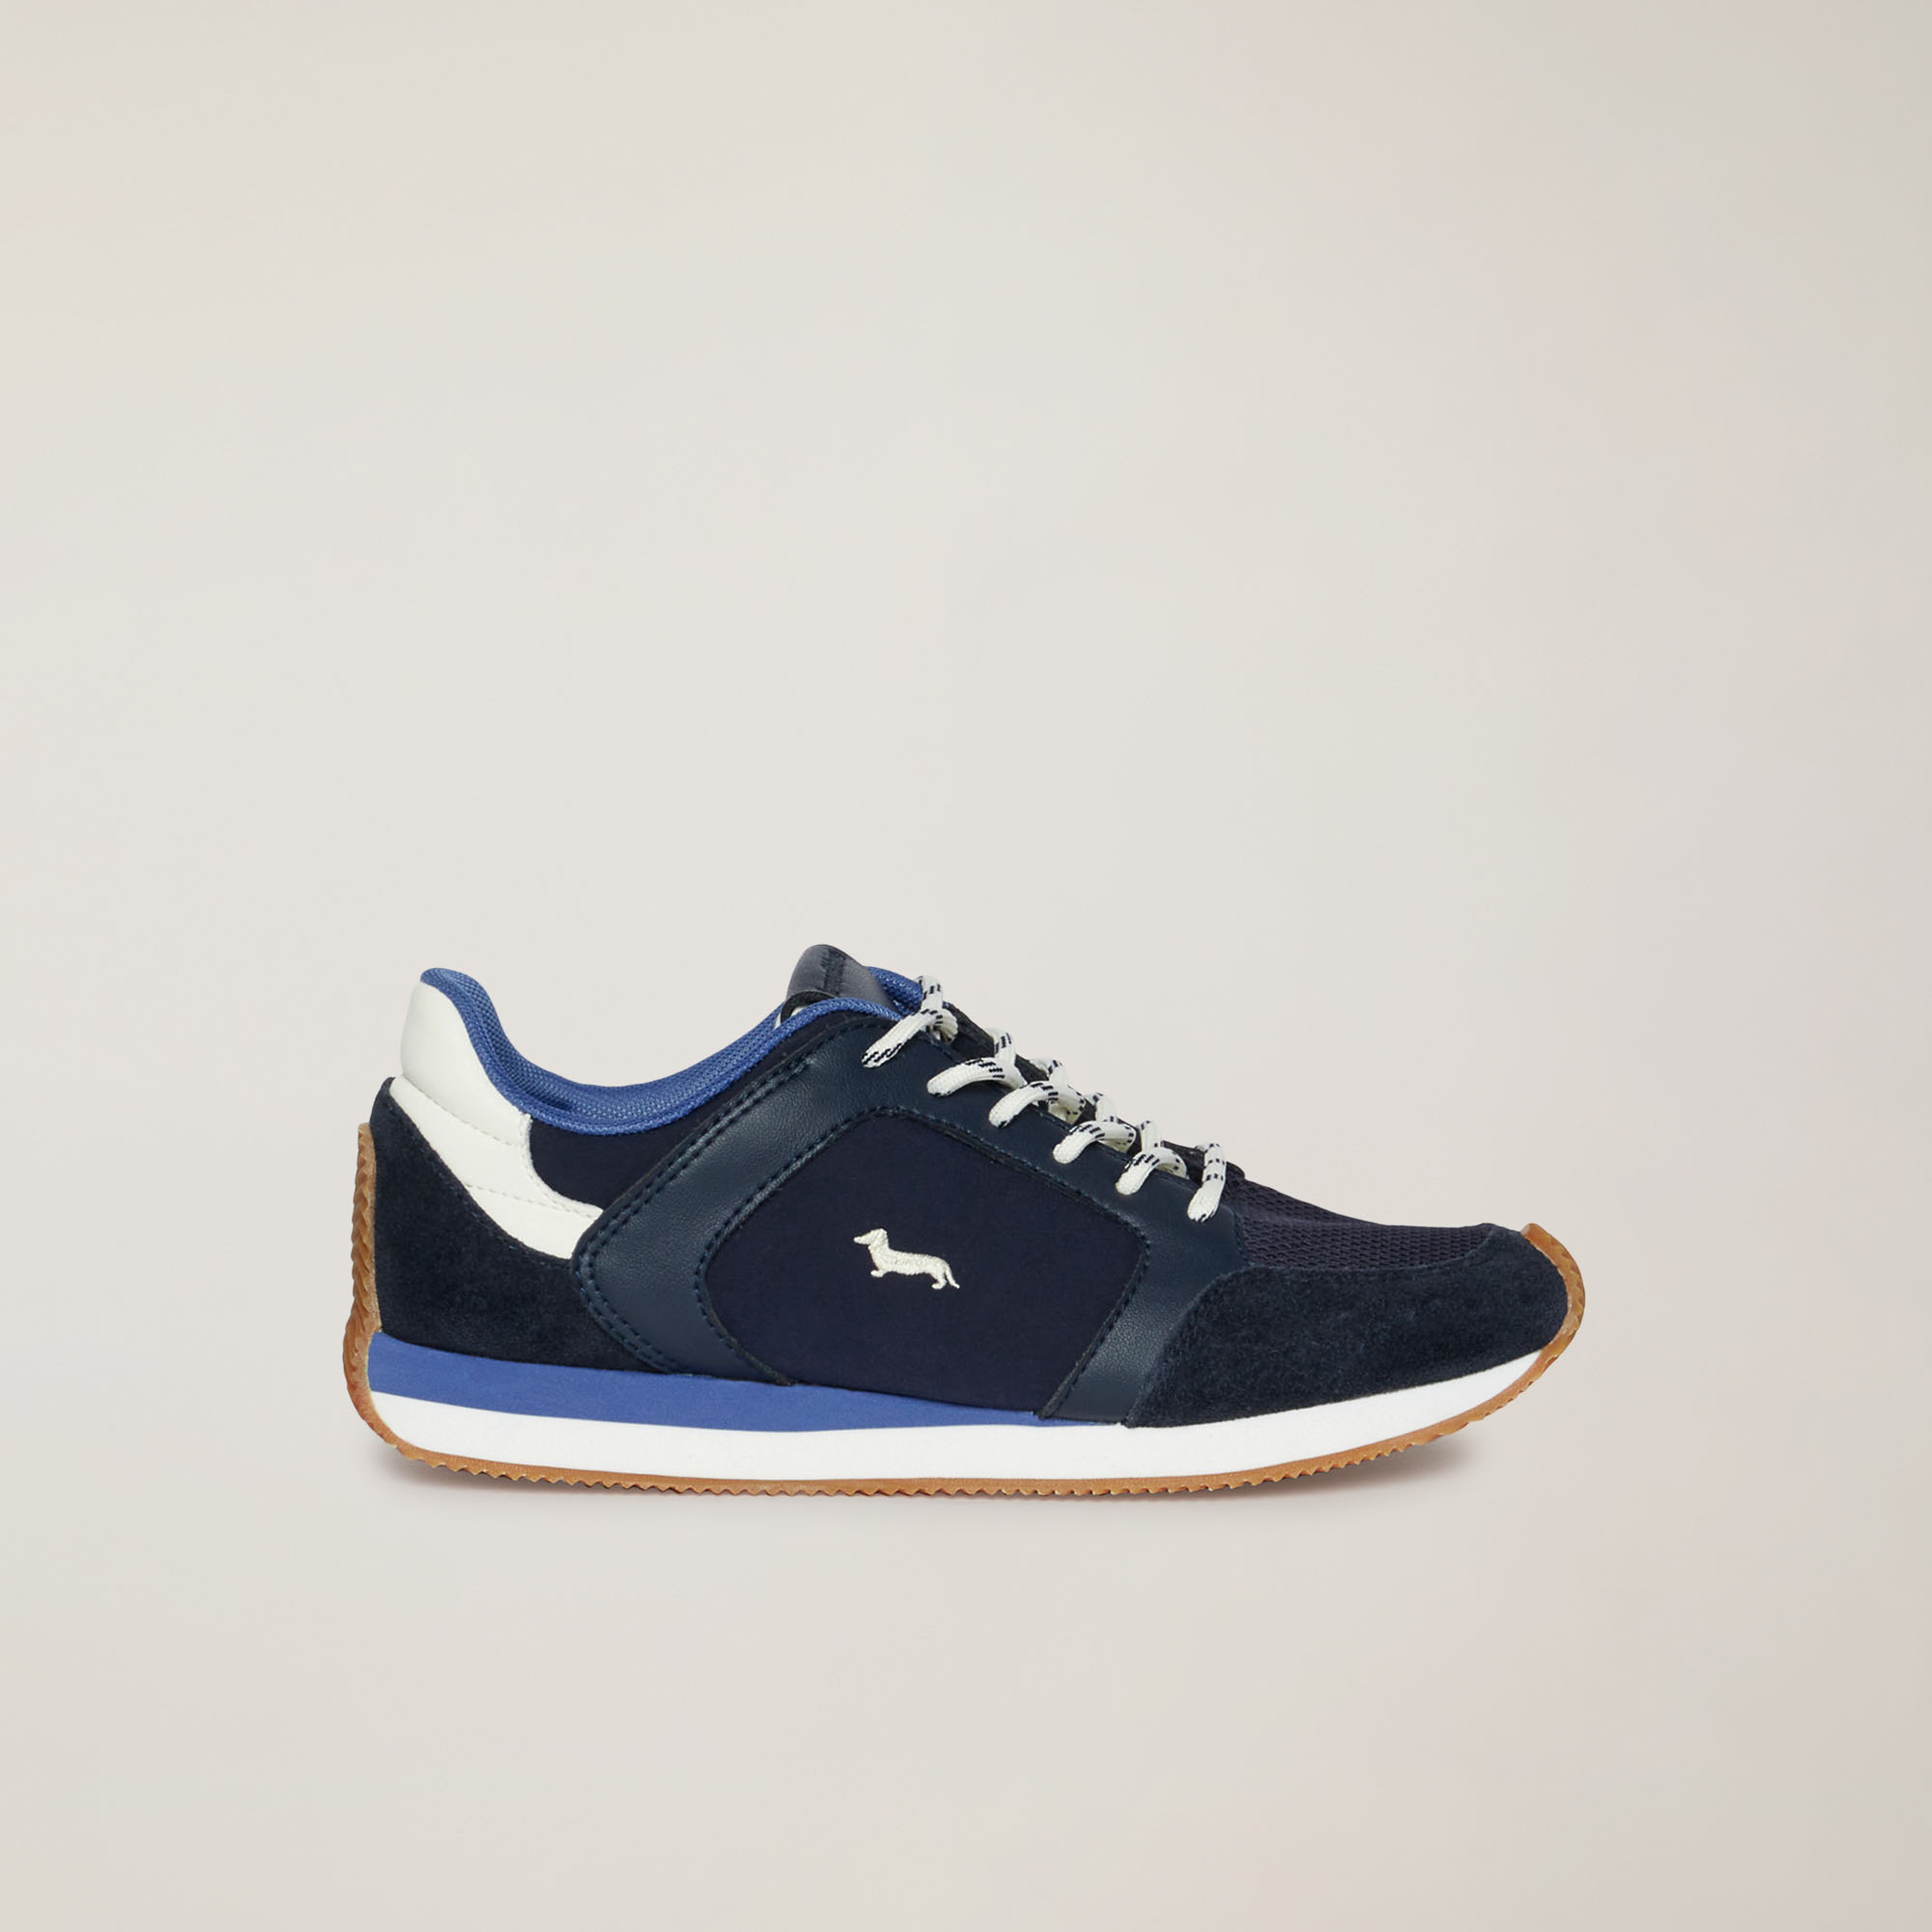 Sneakers Suola A Contrasto, Blu Navy, large